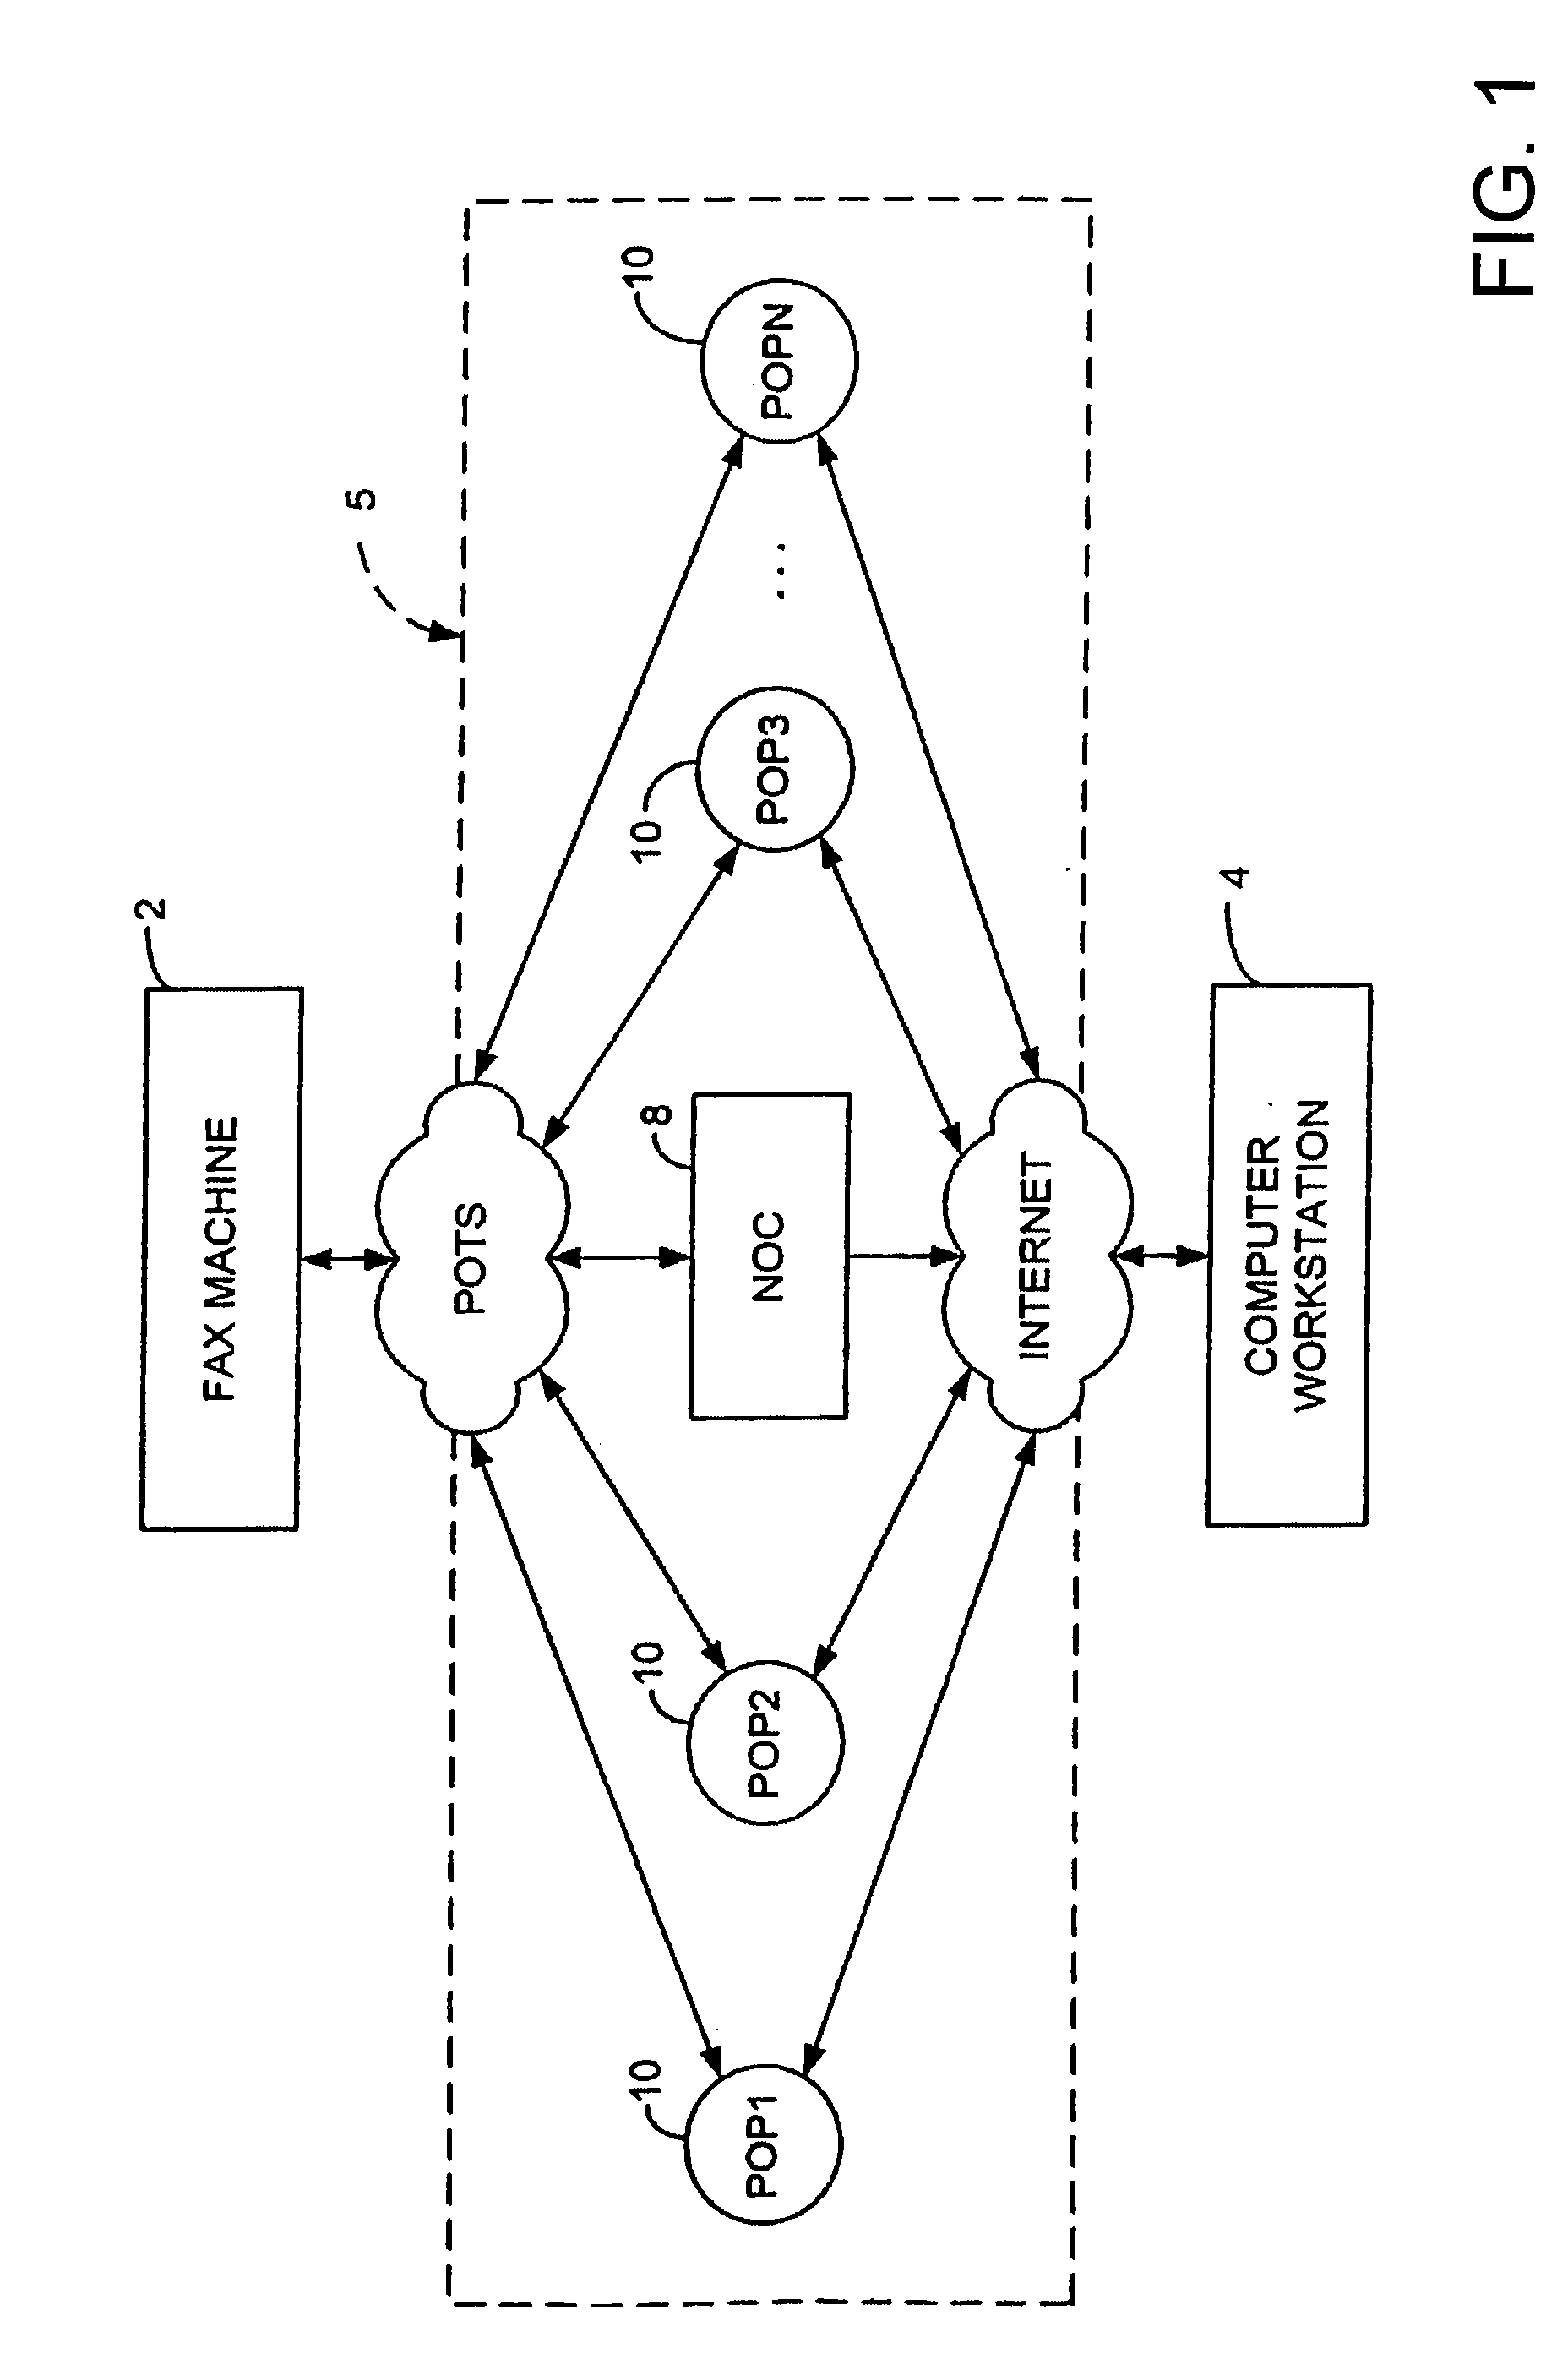 Methods and apparatus for facilitating facsimile transmissions to electronic storage destinations